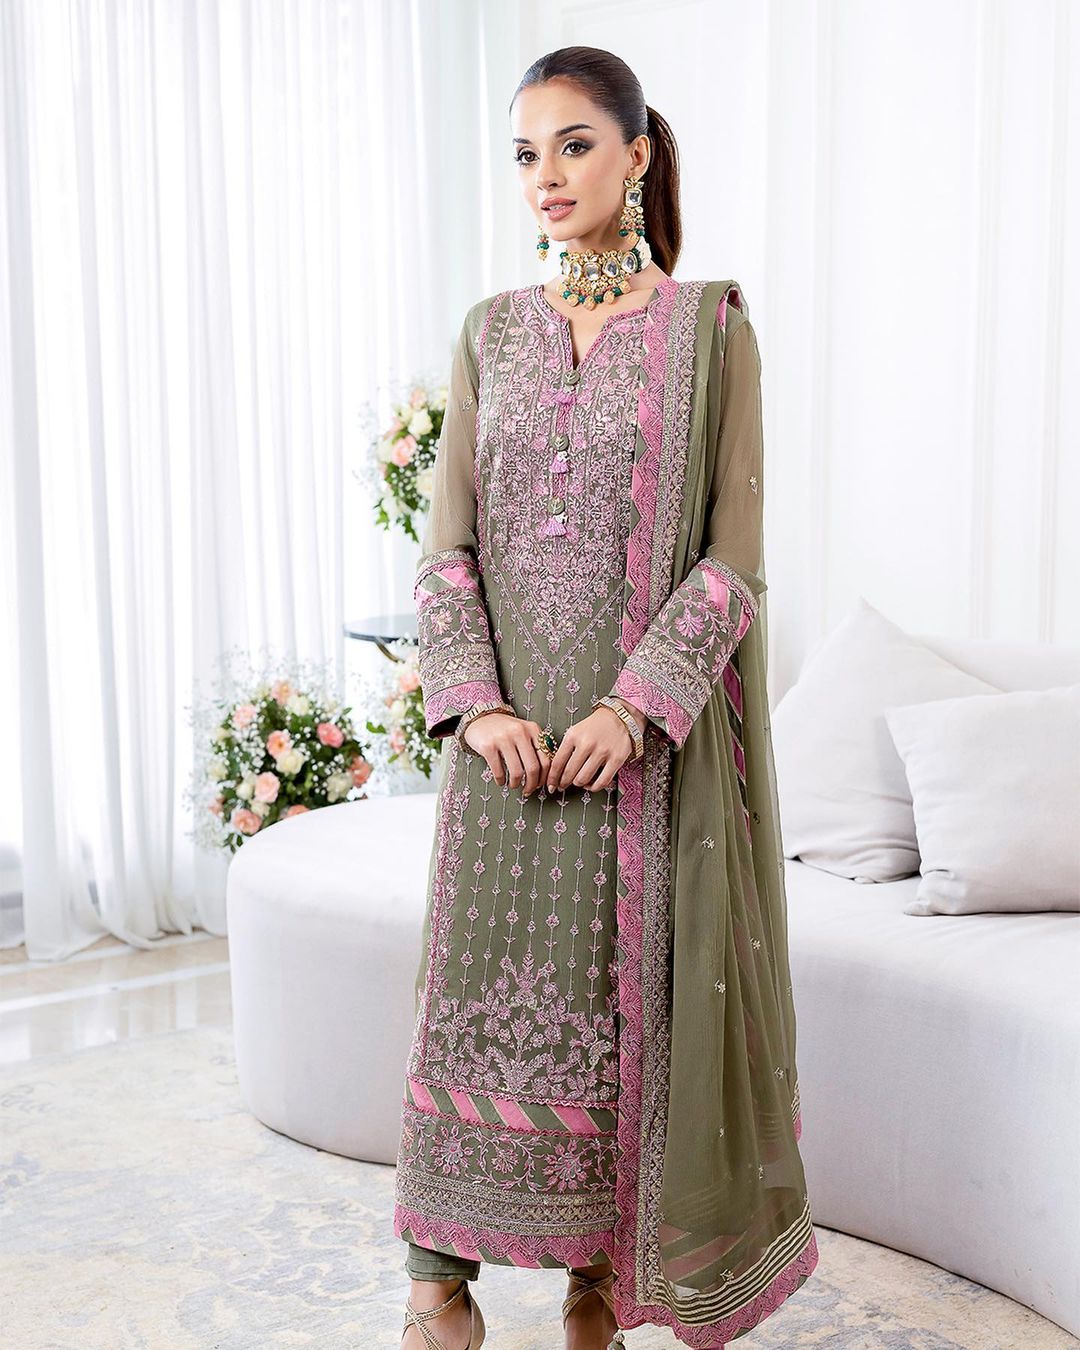 Olive Green Outfit With Intricate Pink Embroidery